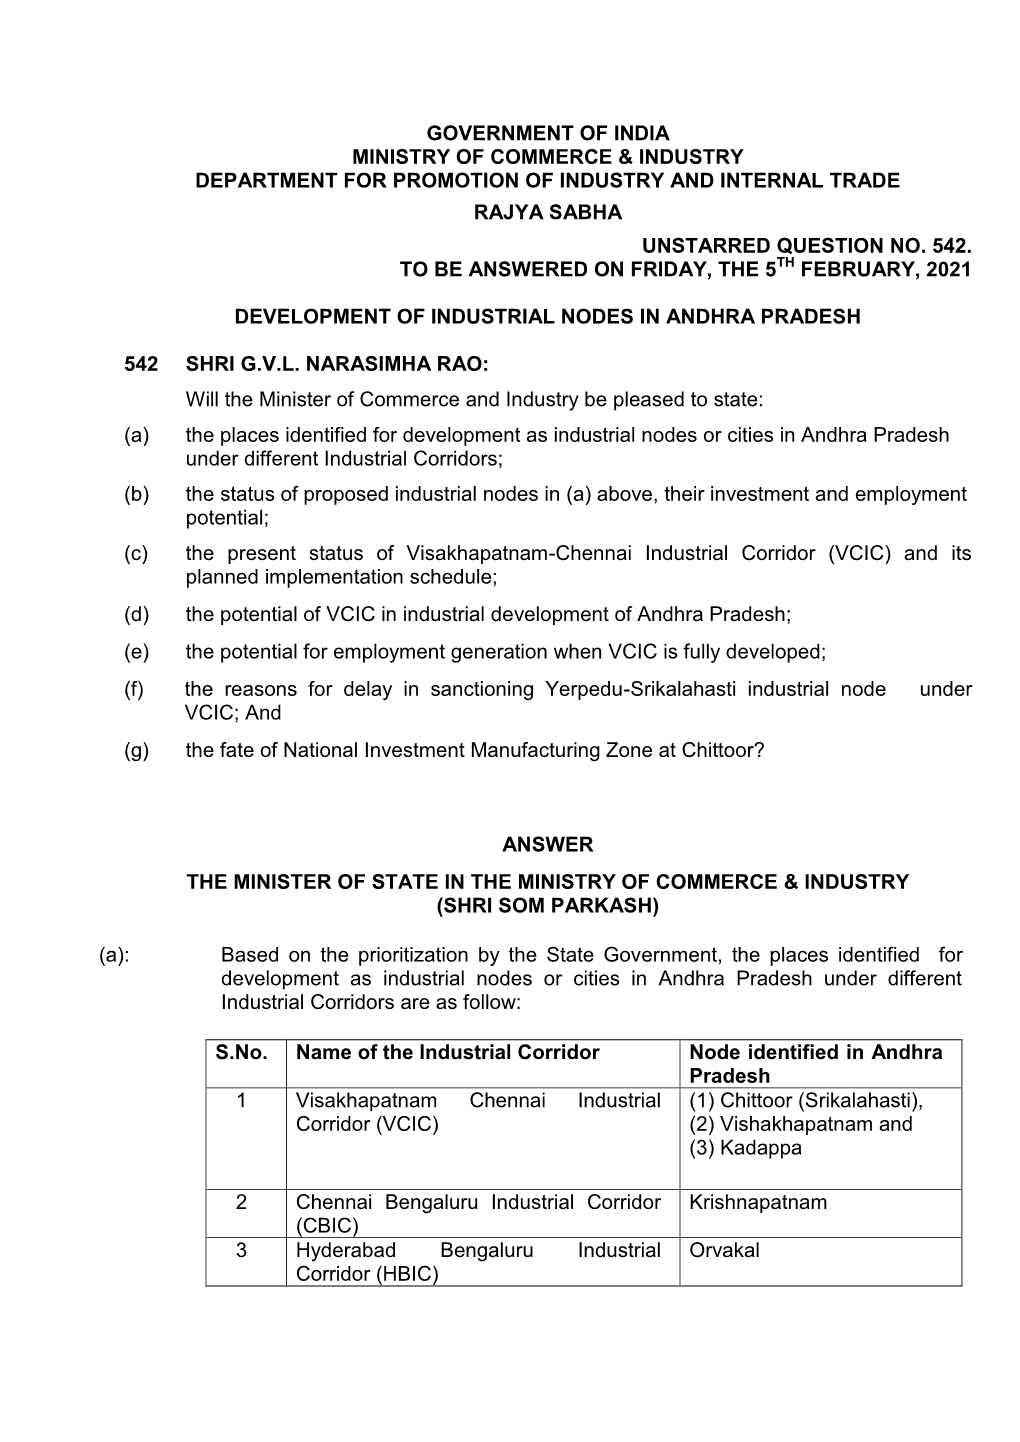 Government of India Ministry of Commerce & Industry Department for Promotion of Industry and Internal Trade